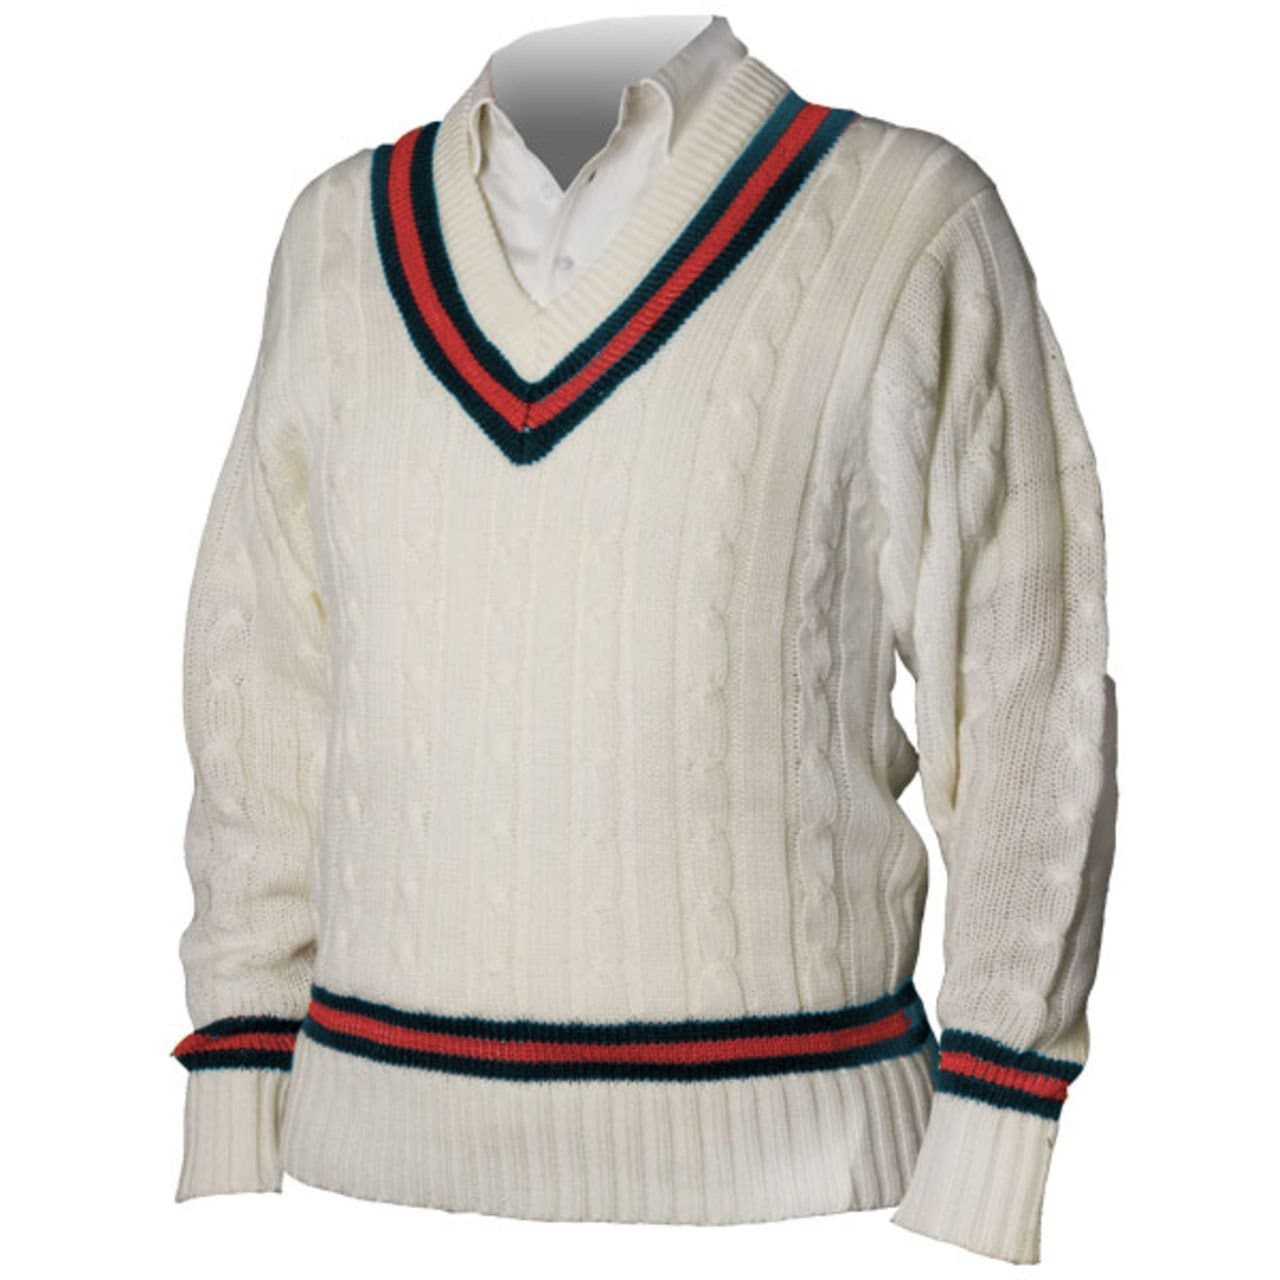 2 Types of Cricket Sweater Worn by Cricketers During Cold Weather Match